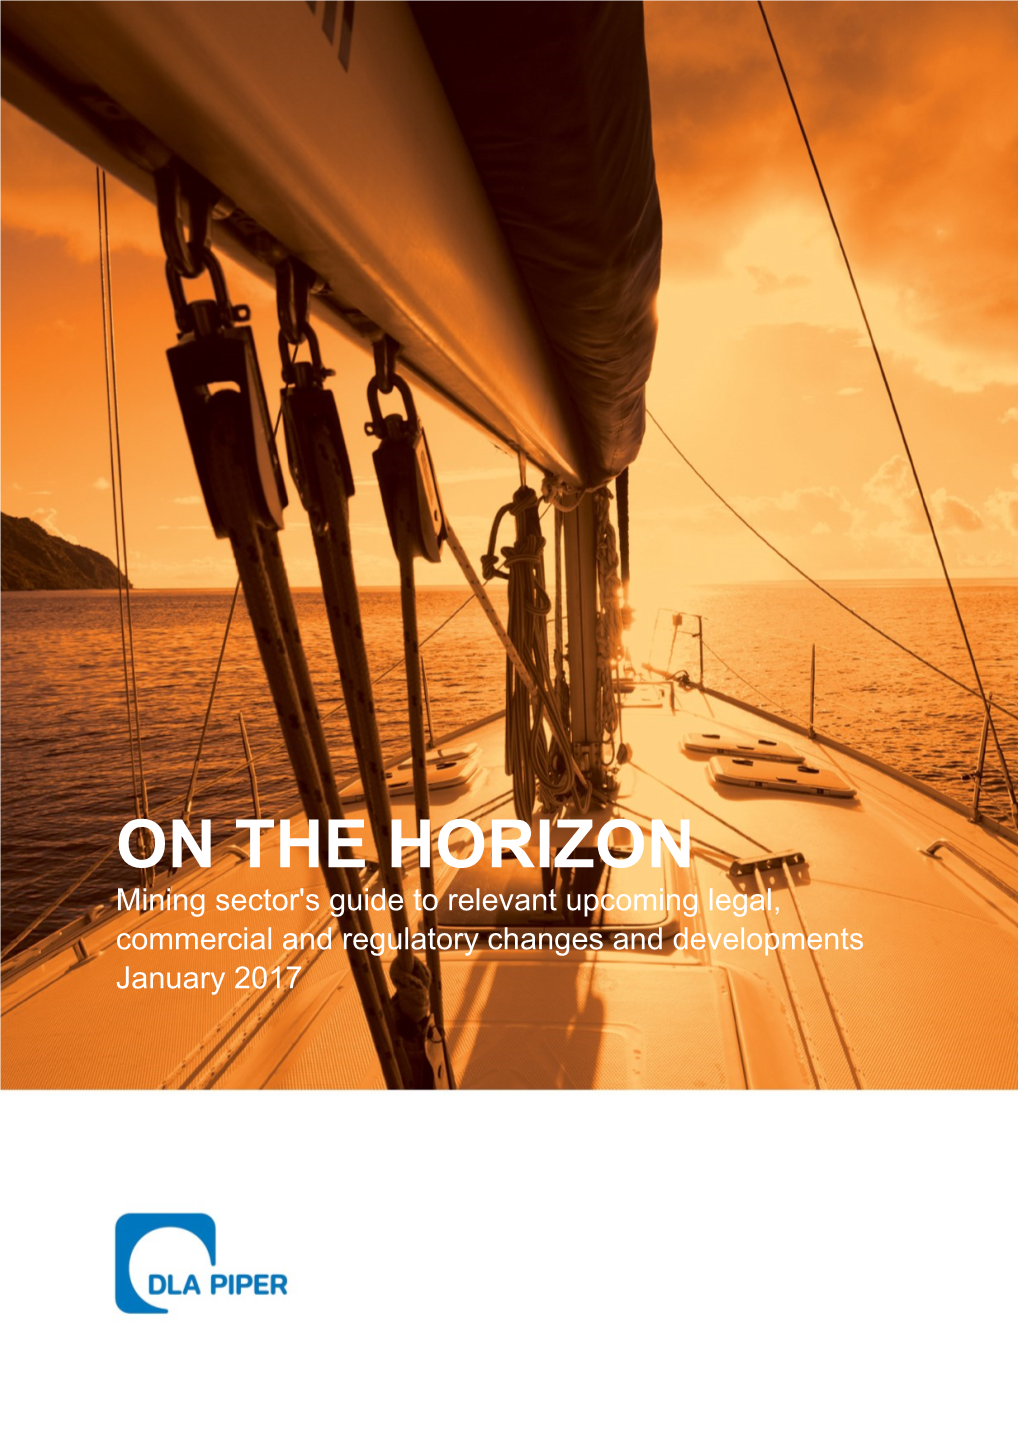 ON the HORIZON Mining Sector's Guide to Relevant Upcoming Legal, Commercial and Regulatory Changes and Developments January 2017